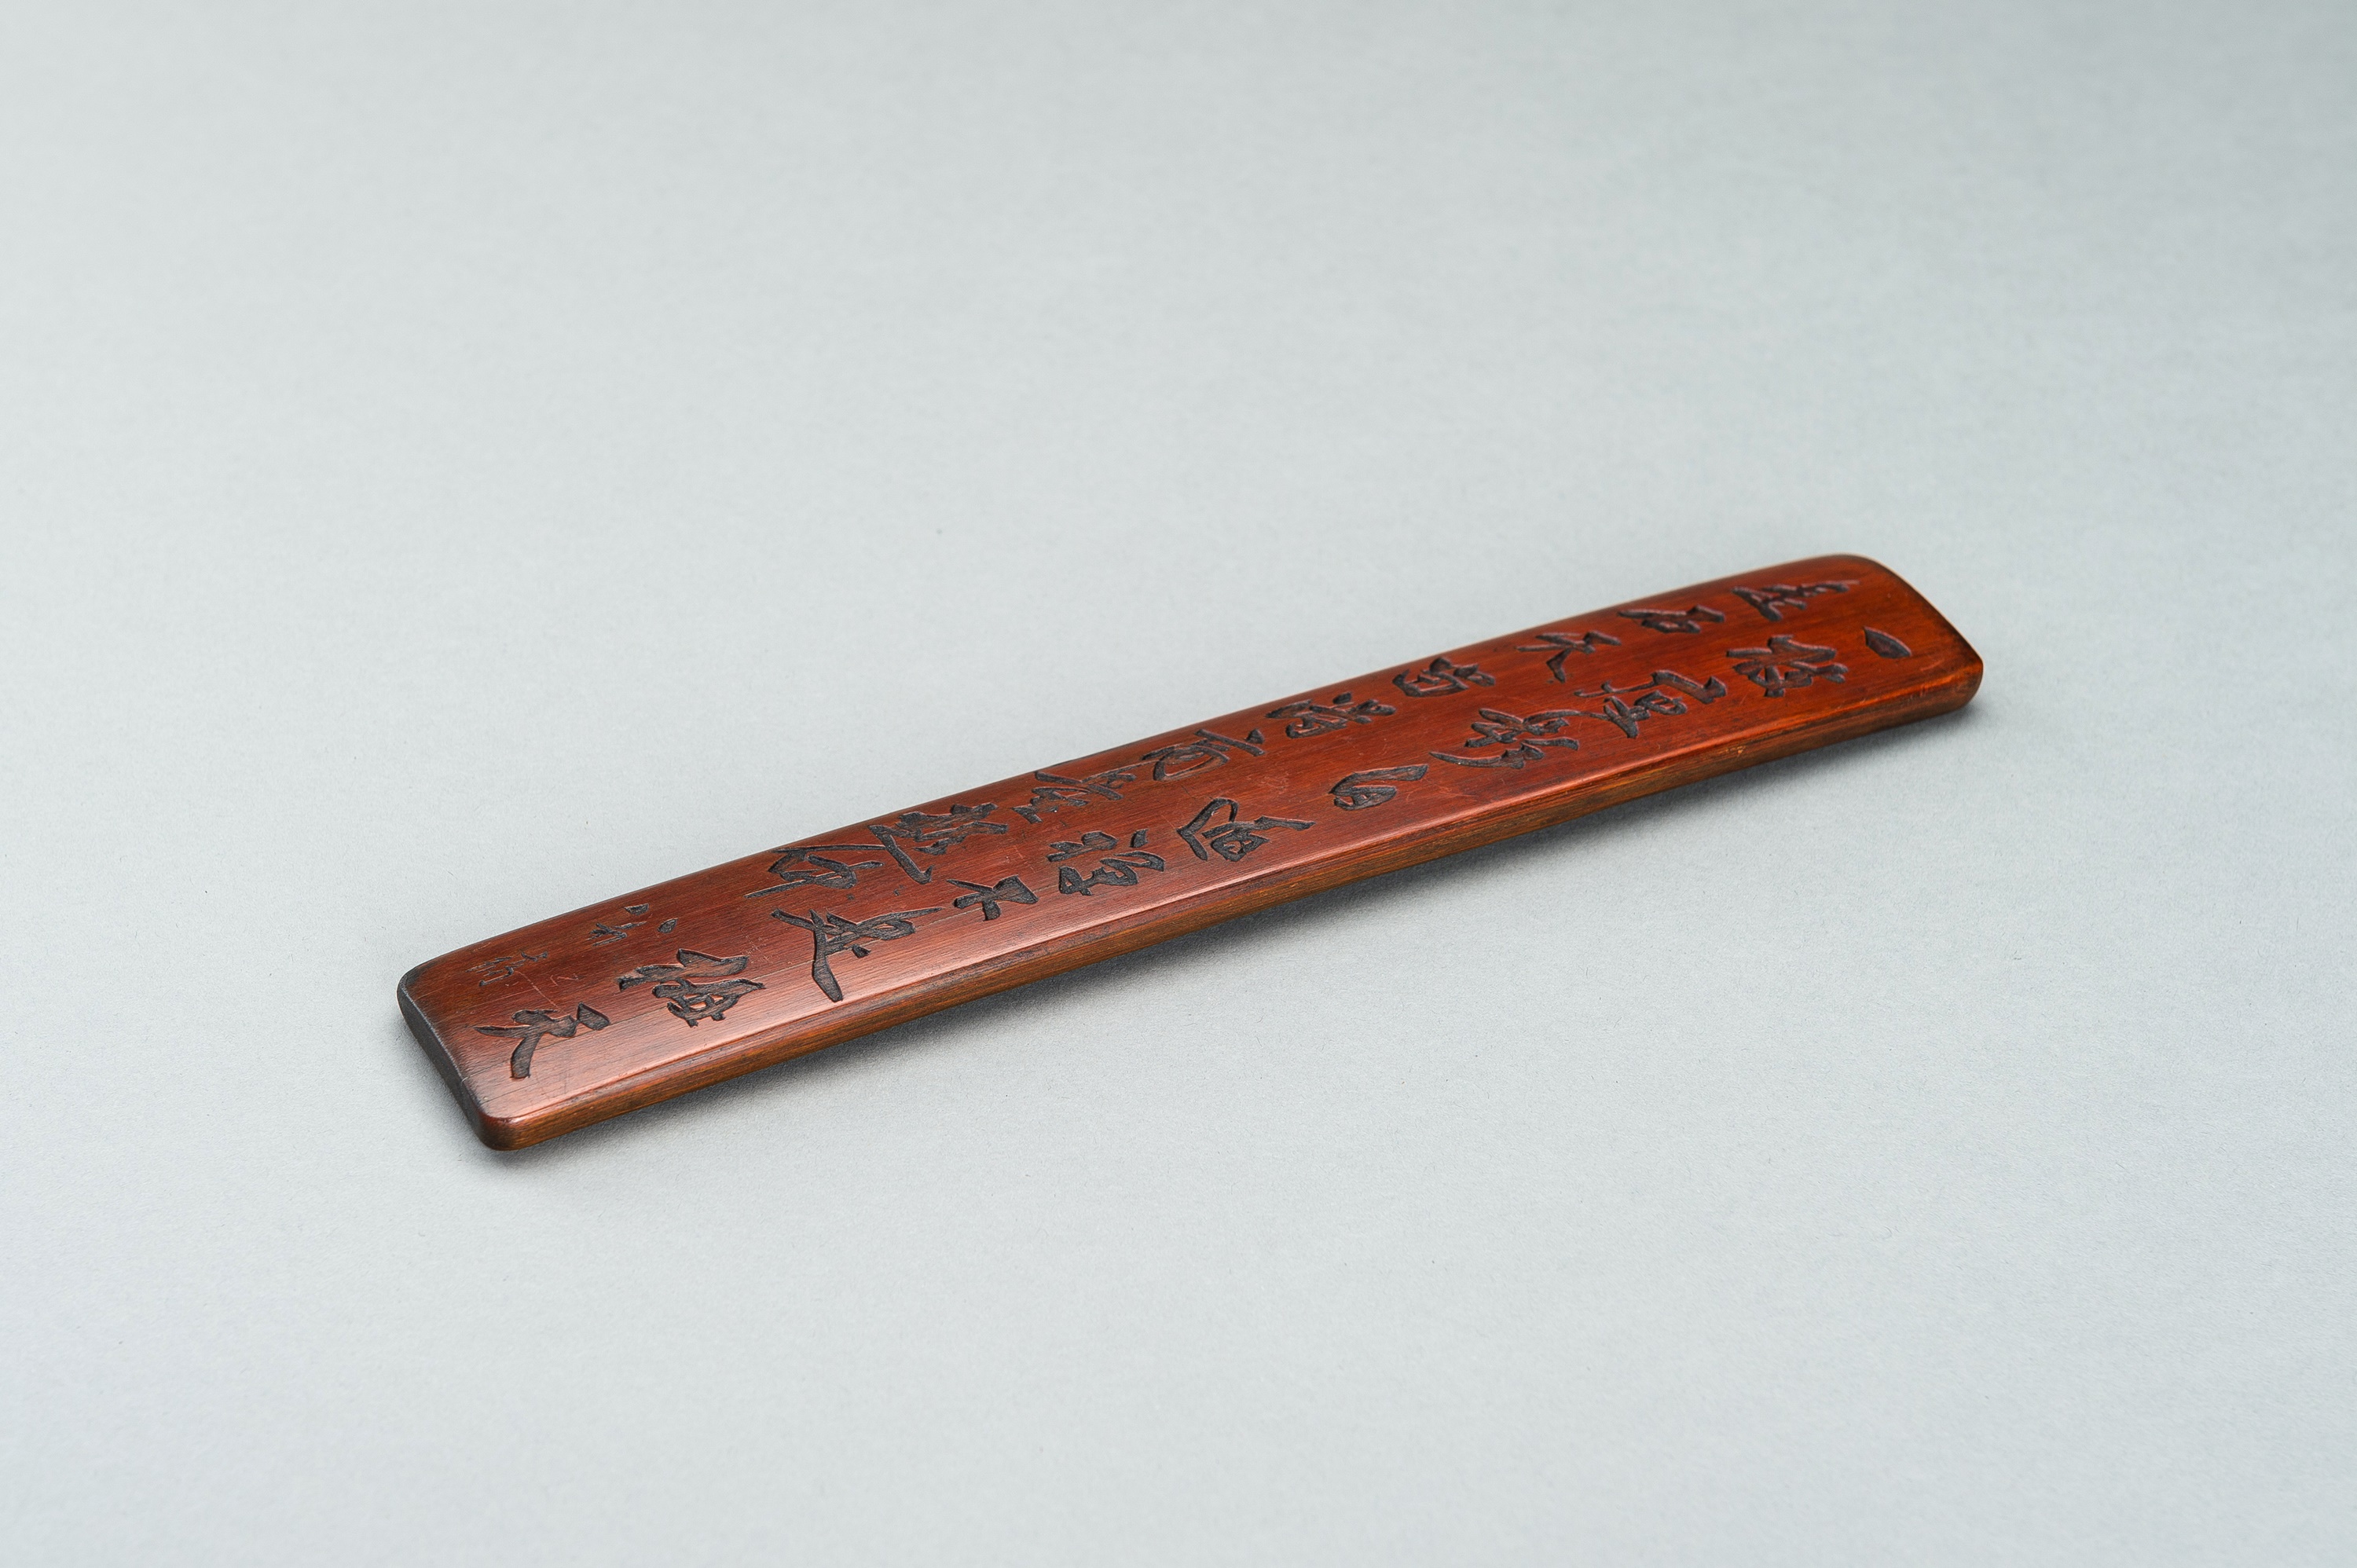 A BAMBOO WRIST REST WITH CALIGRAPHY - Image 3 of 9